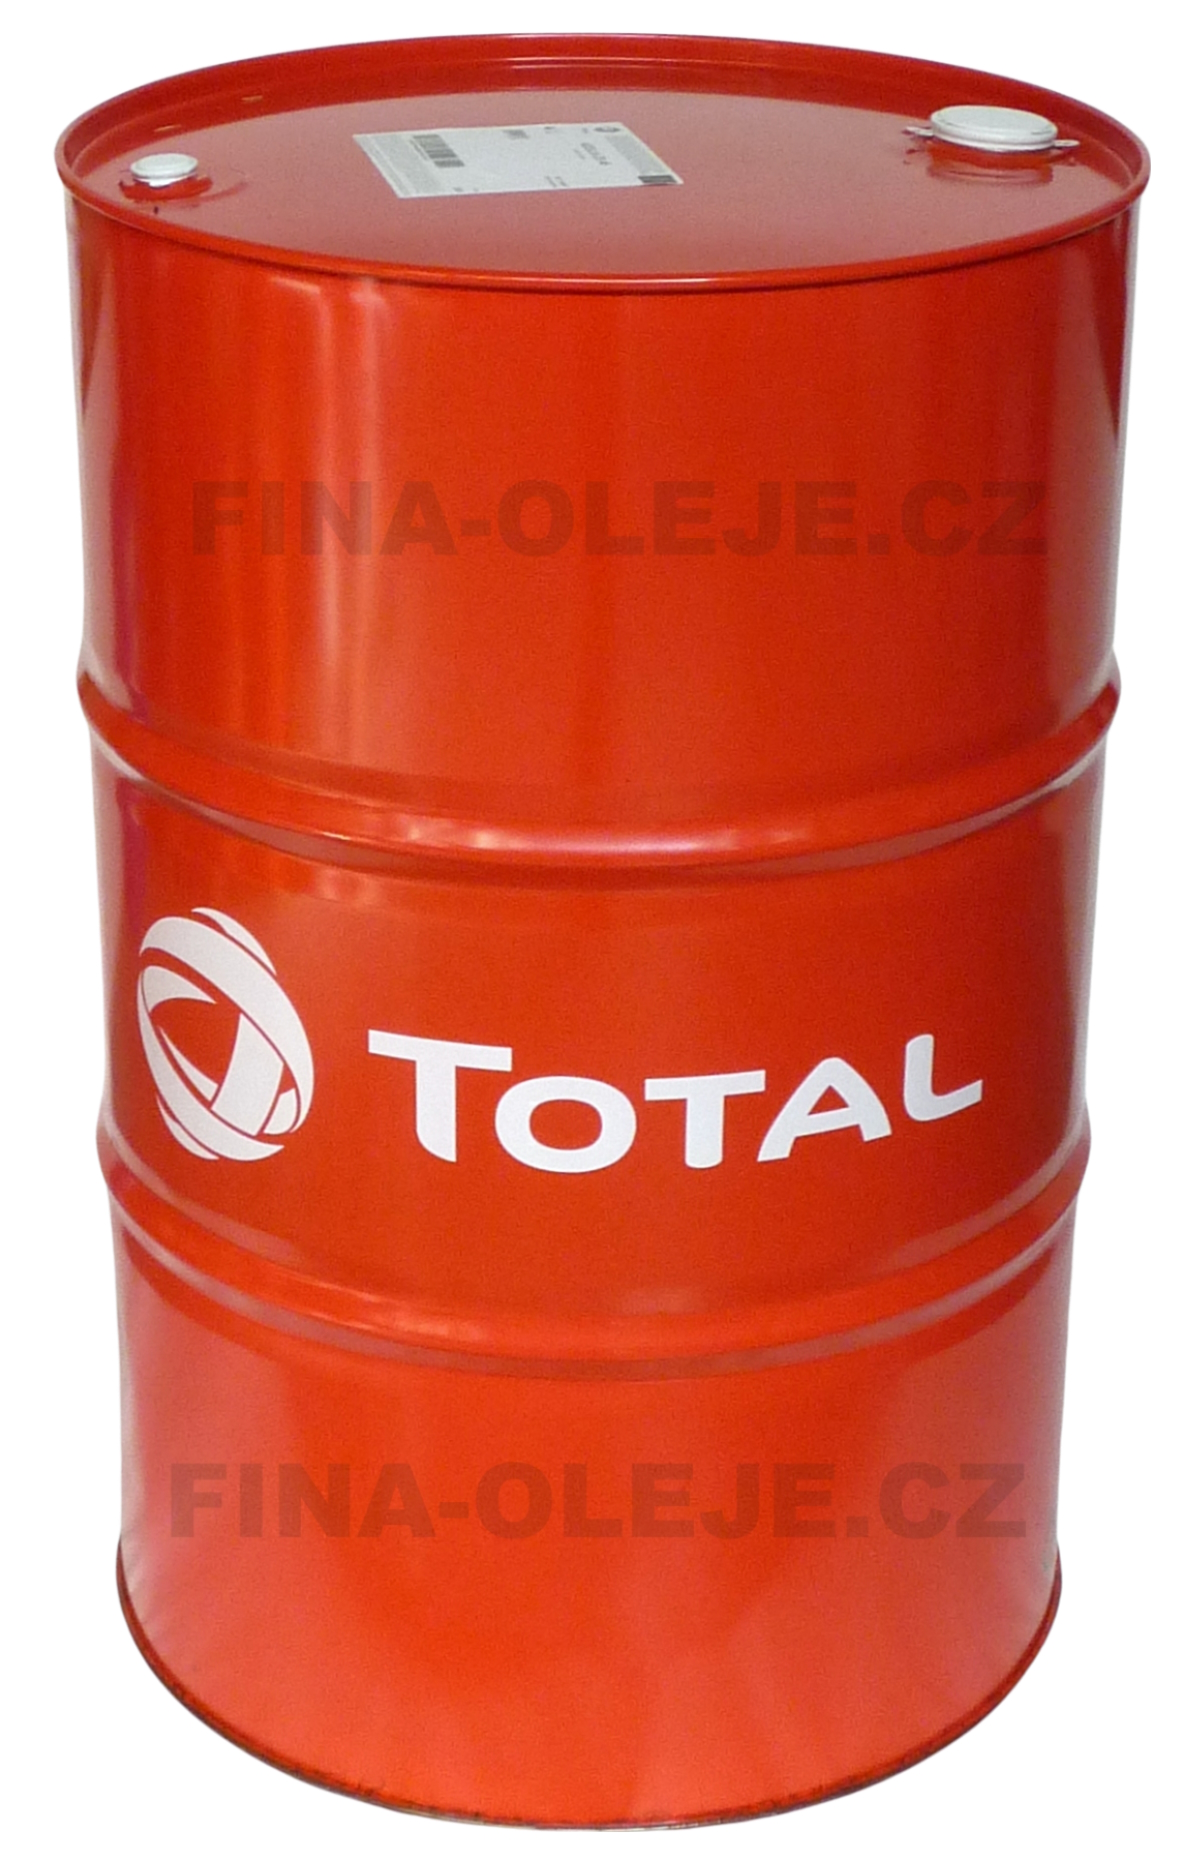 TOTAL CARTER SY 320 - 208 L